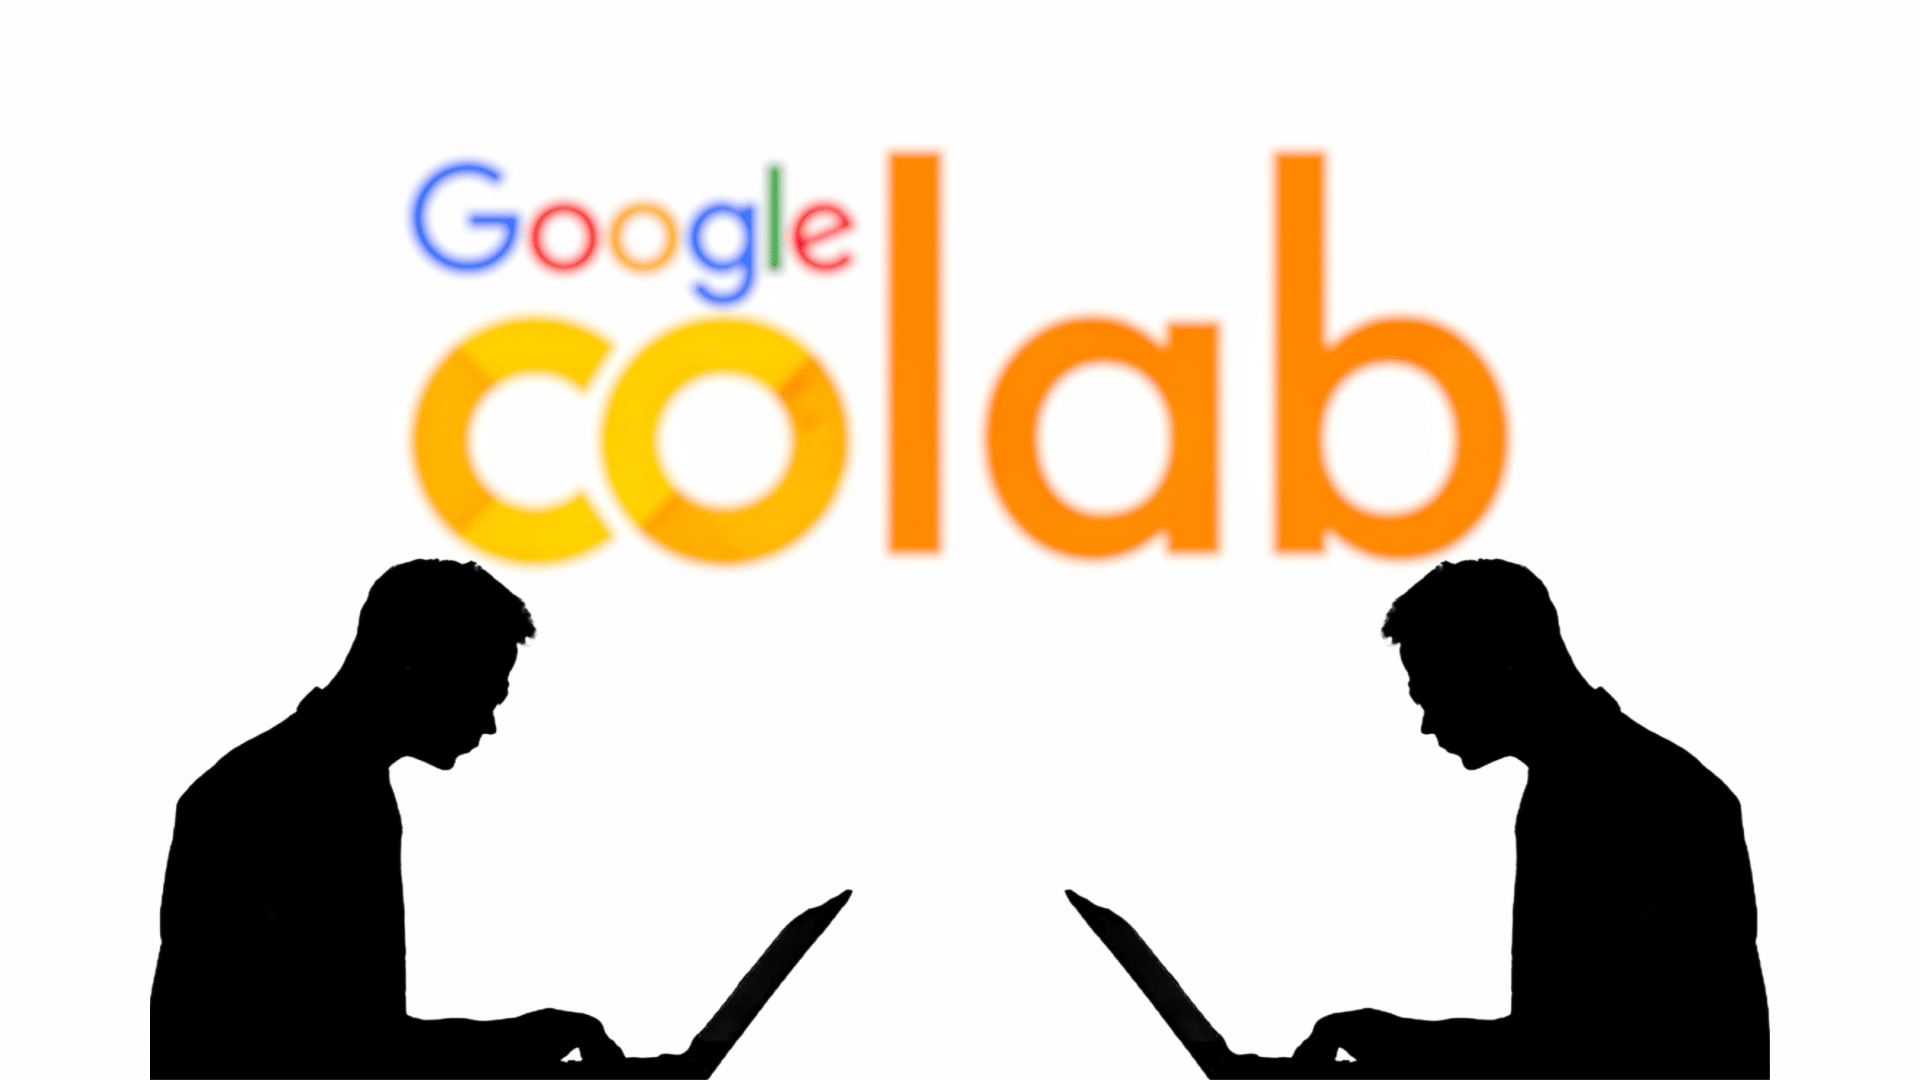 Google Colab for SEO: How to get started